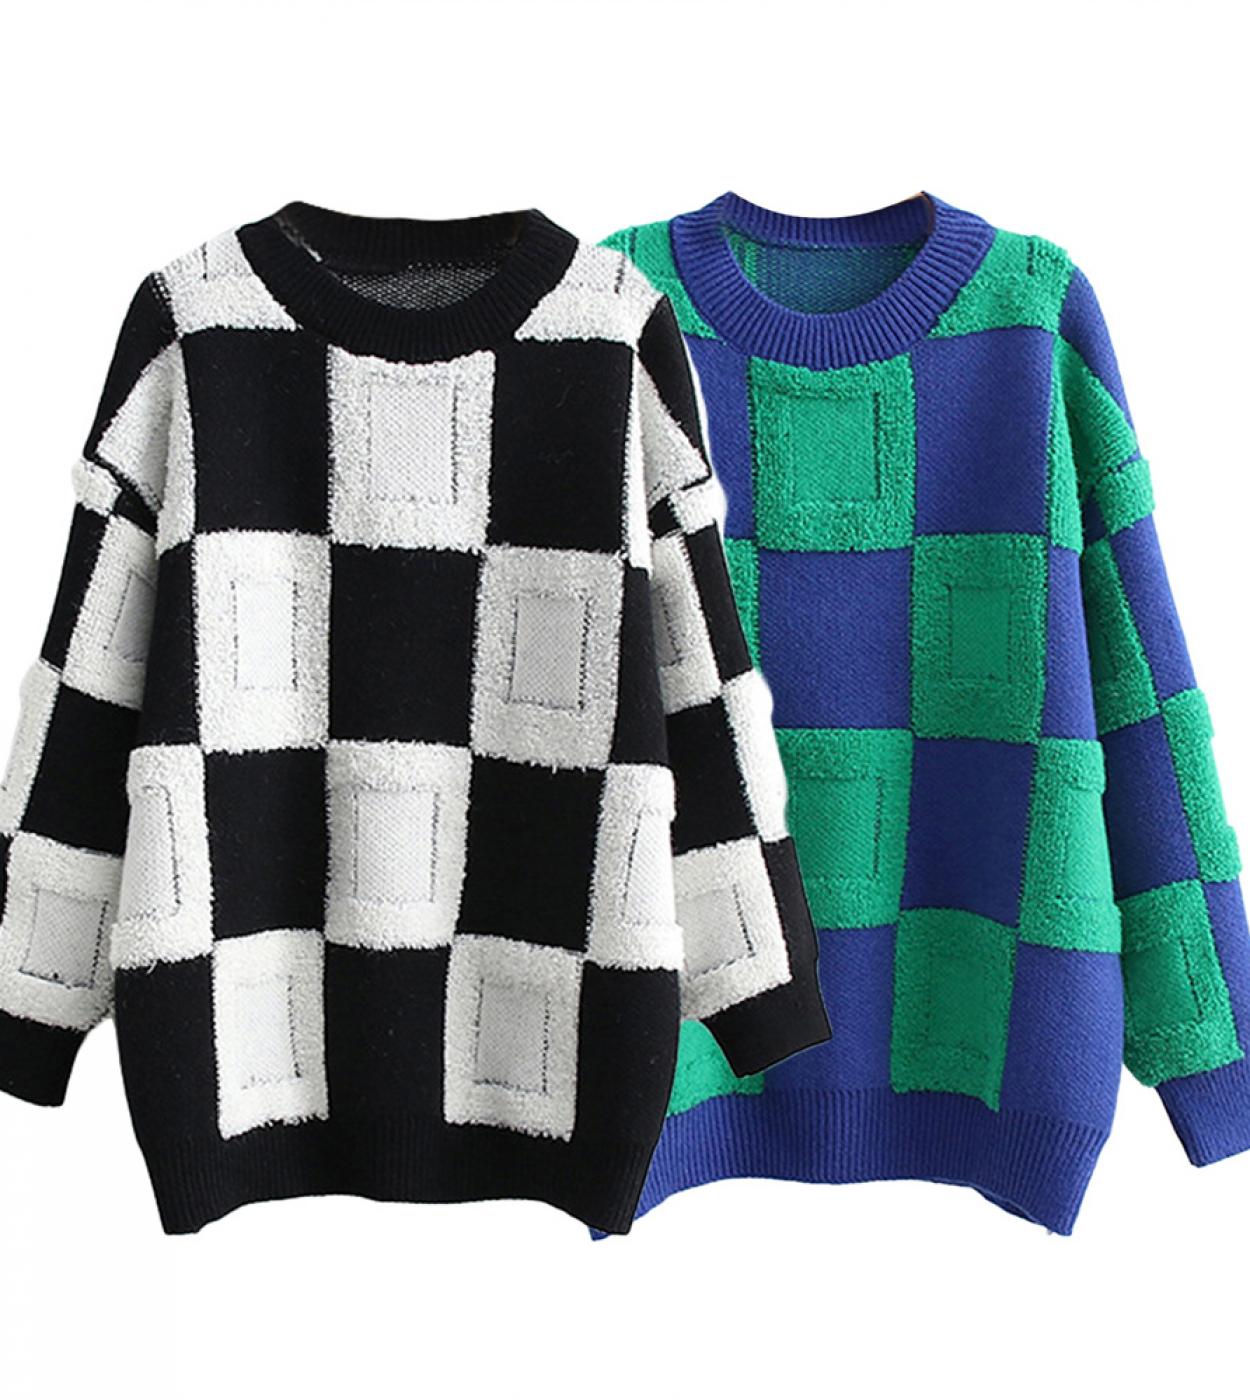 Tetyseysh Women Sweaters Autumn And Winter Fashion Casual Checkerboard Knit Pullover Sweater Color Blocking Round Neck J